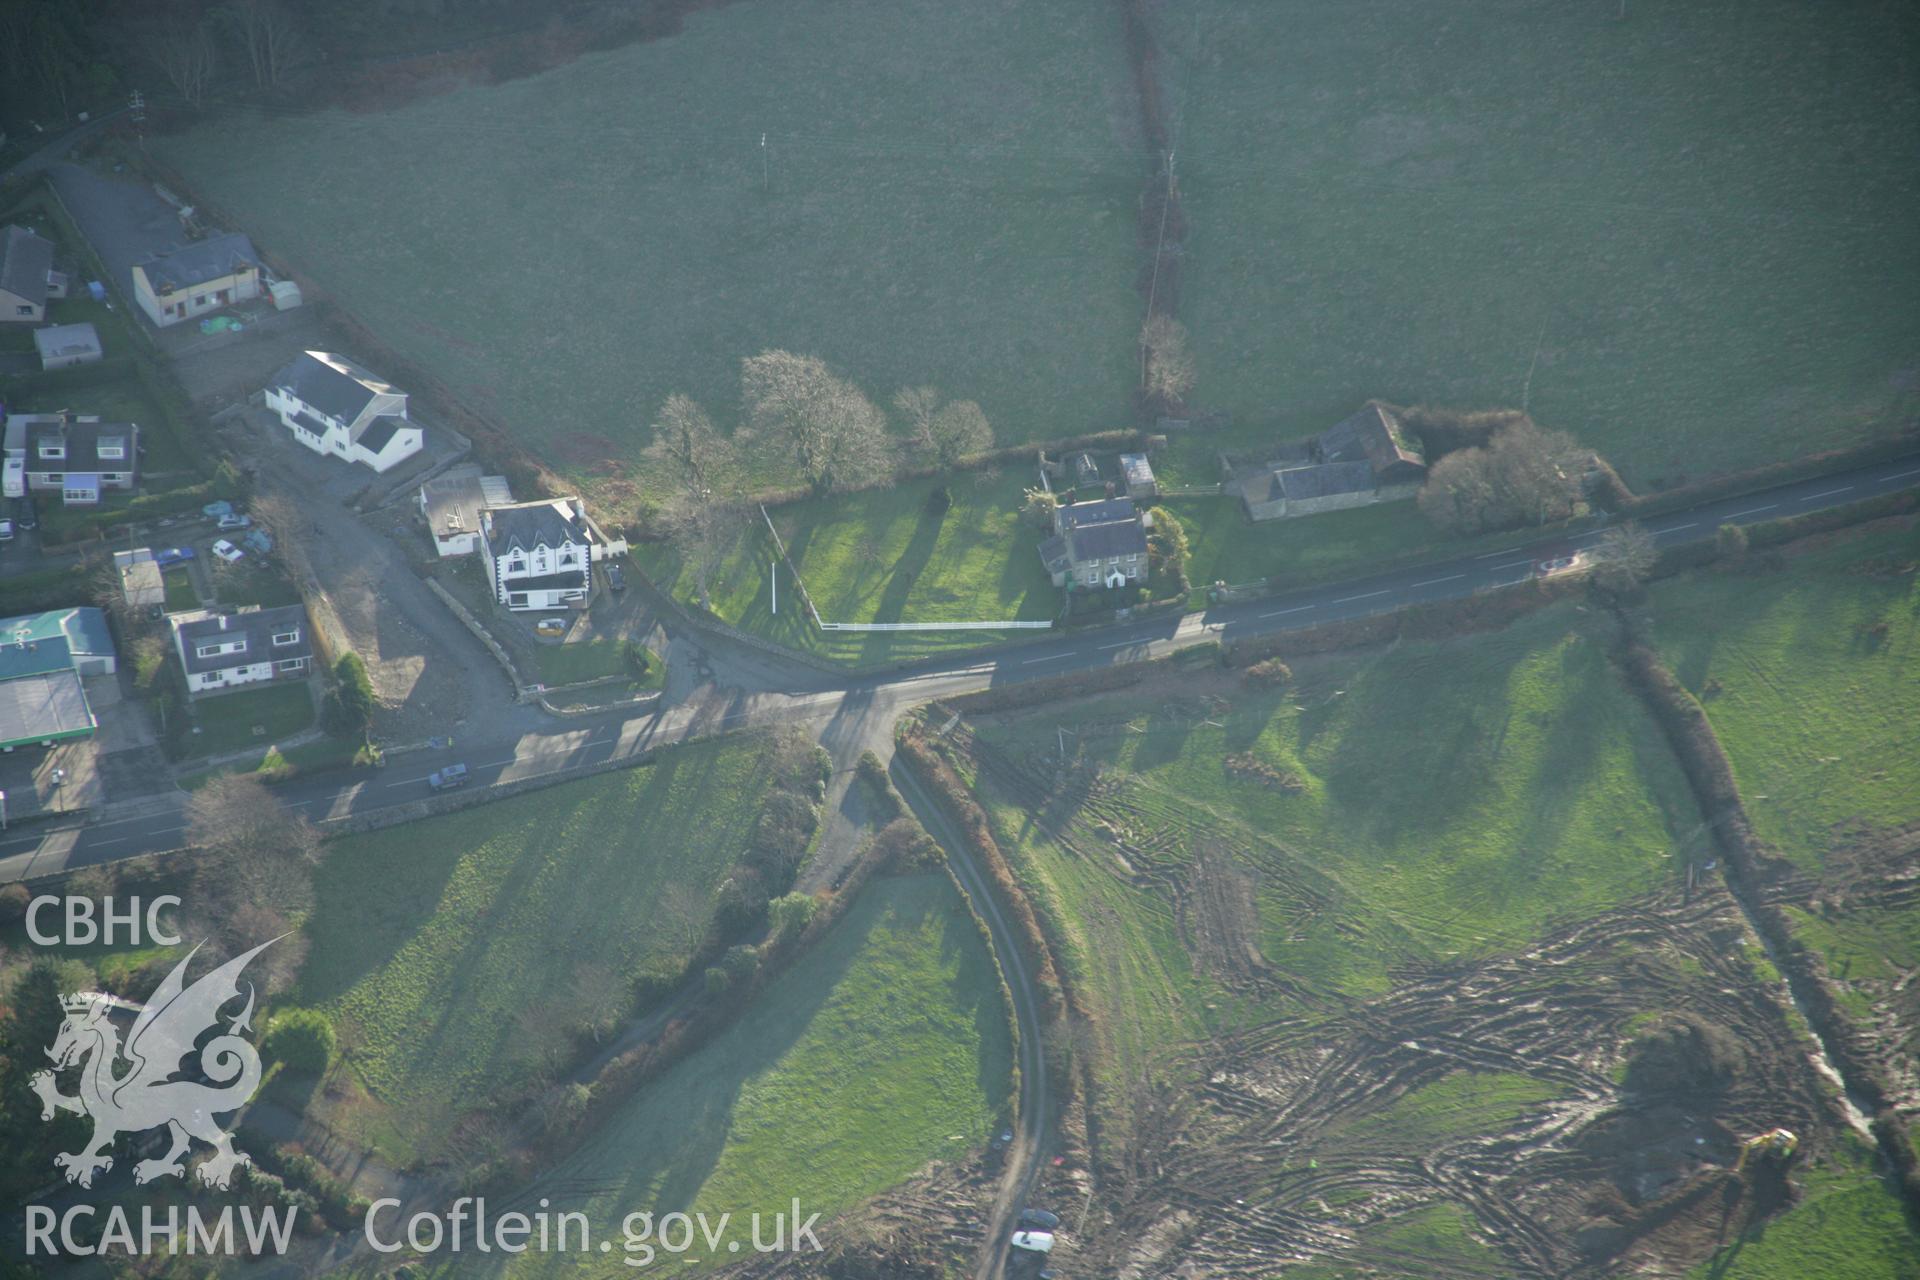 RCAHMW colour oblique aerial photograph of Ffynnon Beuno. Taken on 25 January 2007 by Toby Driver